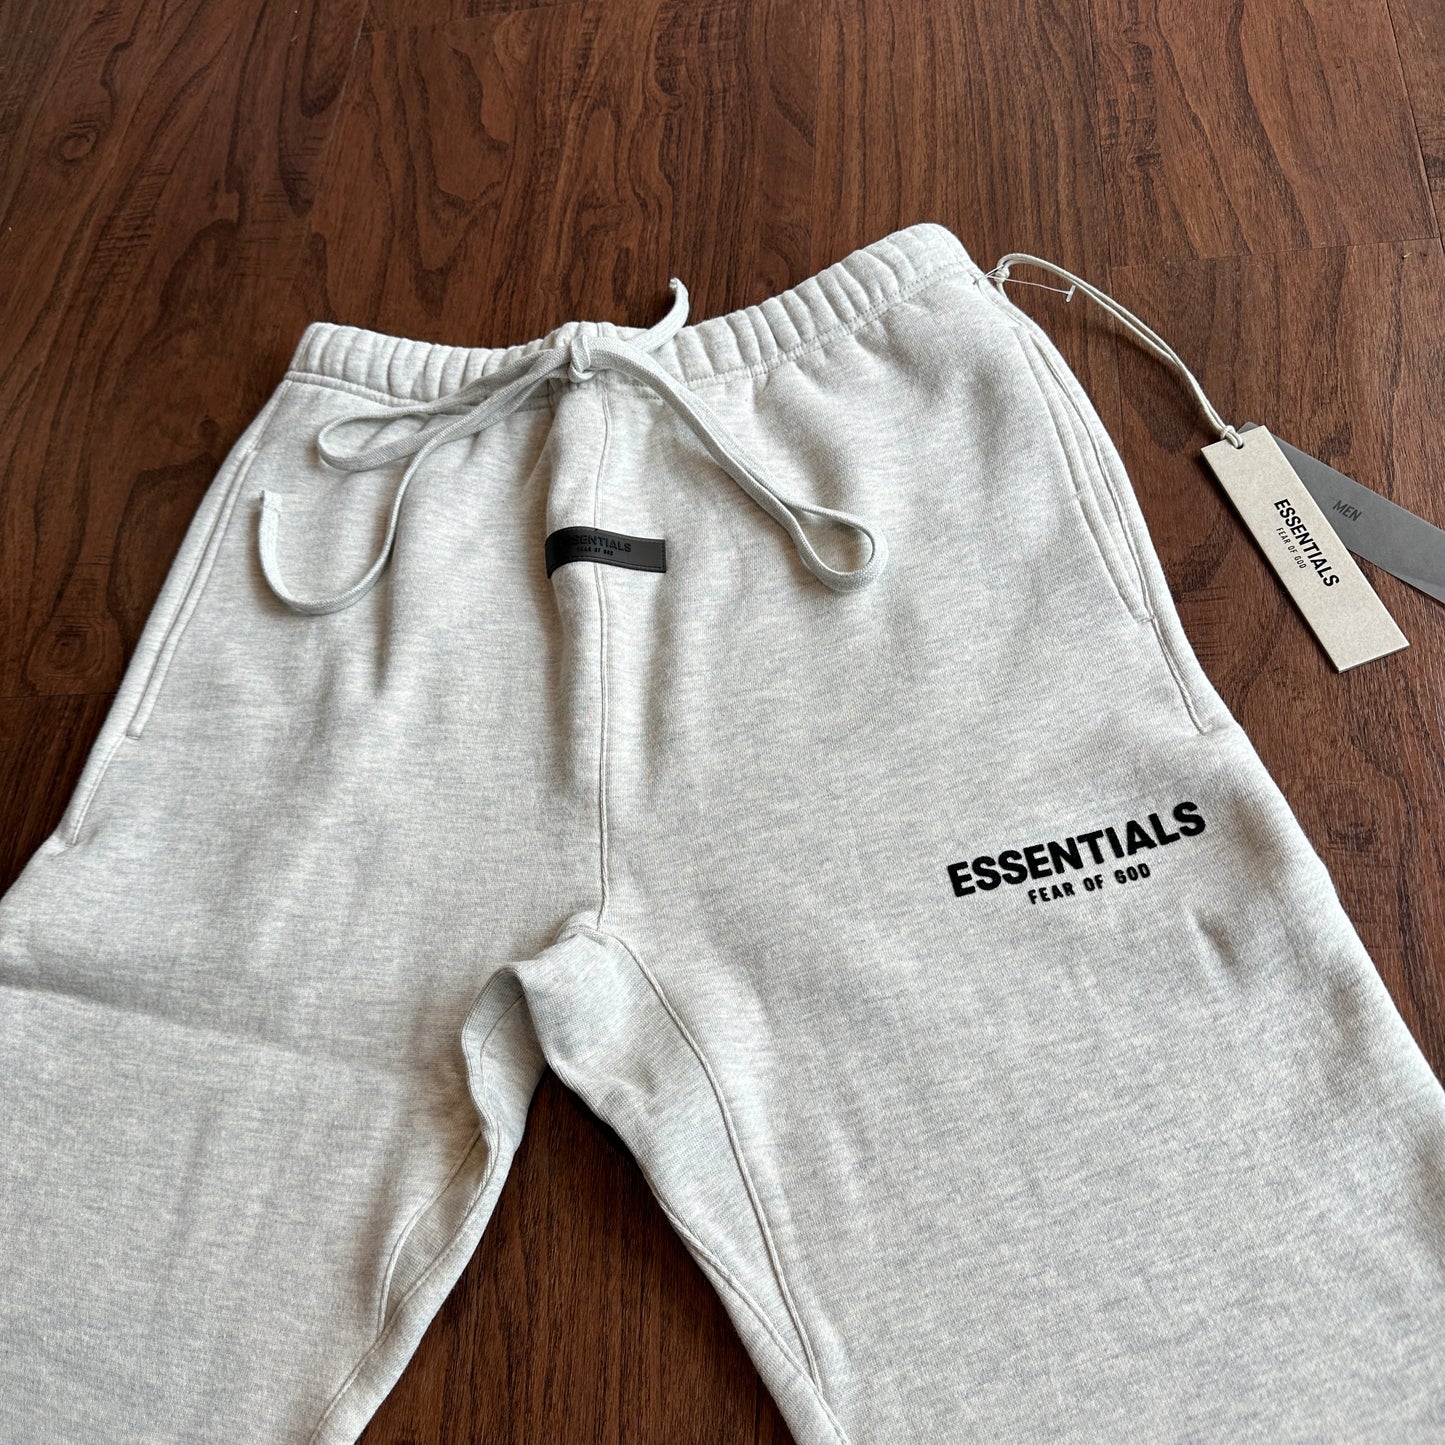 Essentials Fear of God Sweatpant Grey Light Oatmeal Relaxed